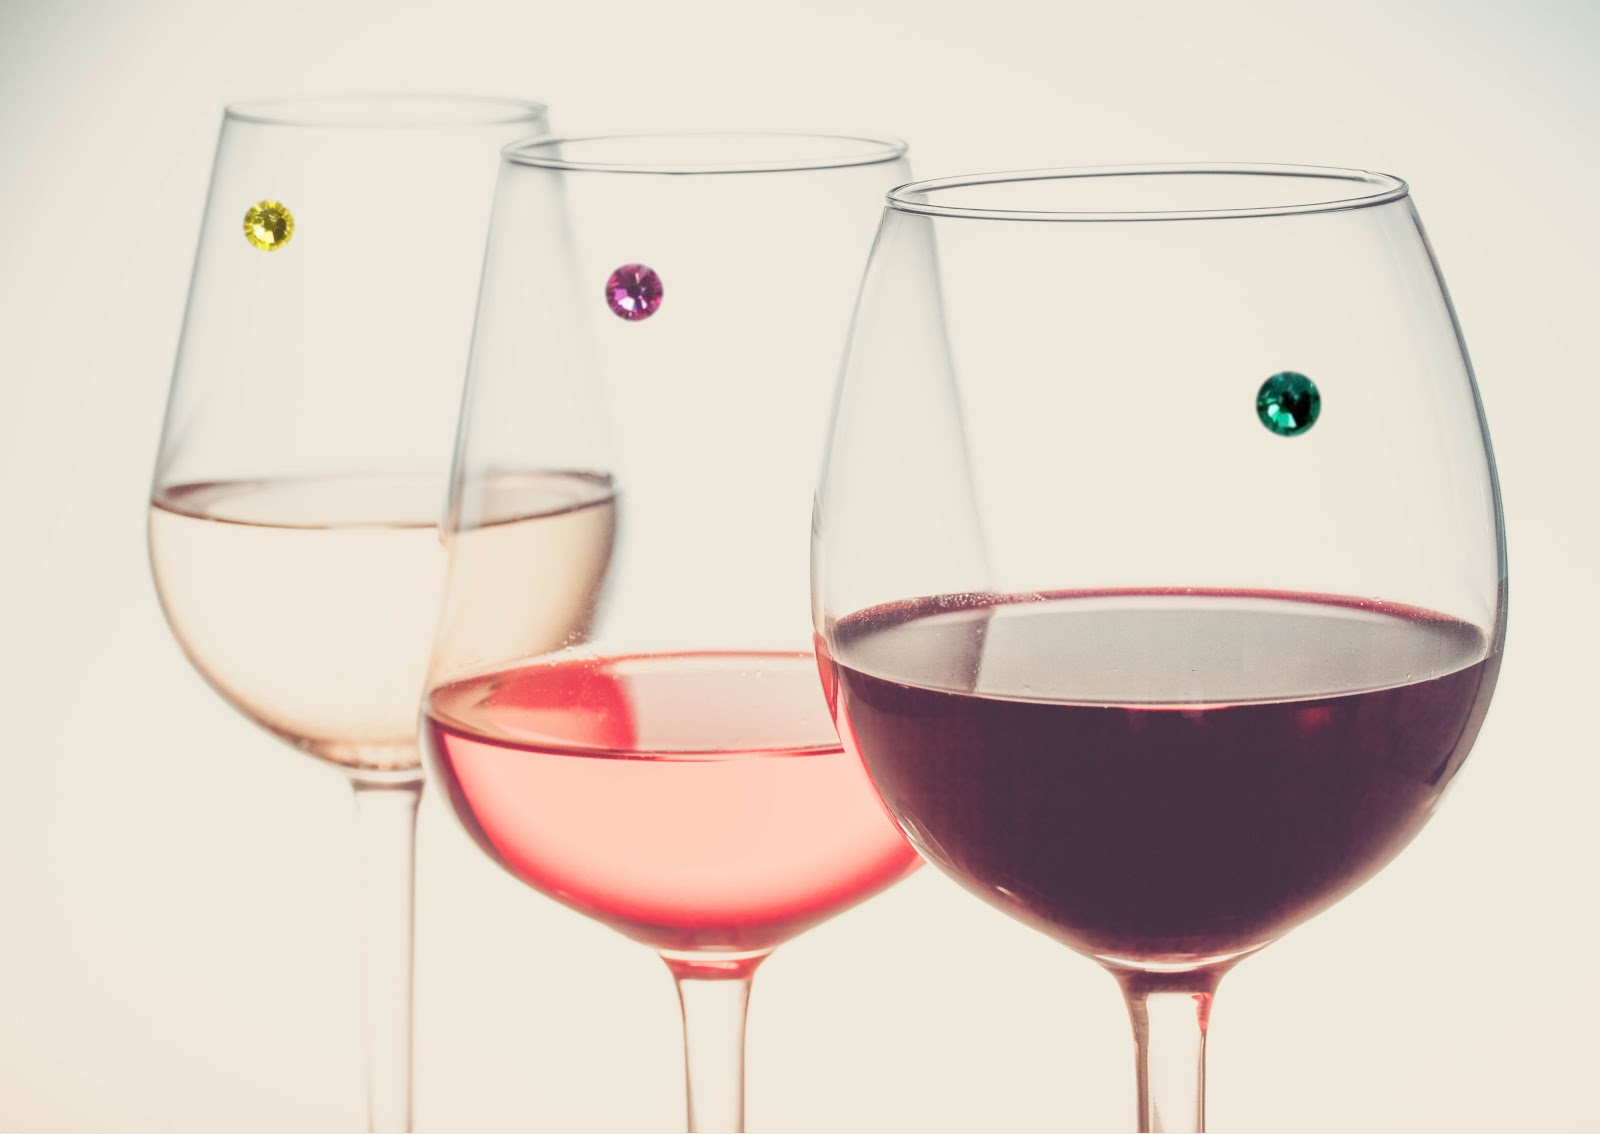 Do Wine Glasses Make a Difference to the Wine?